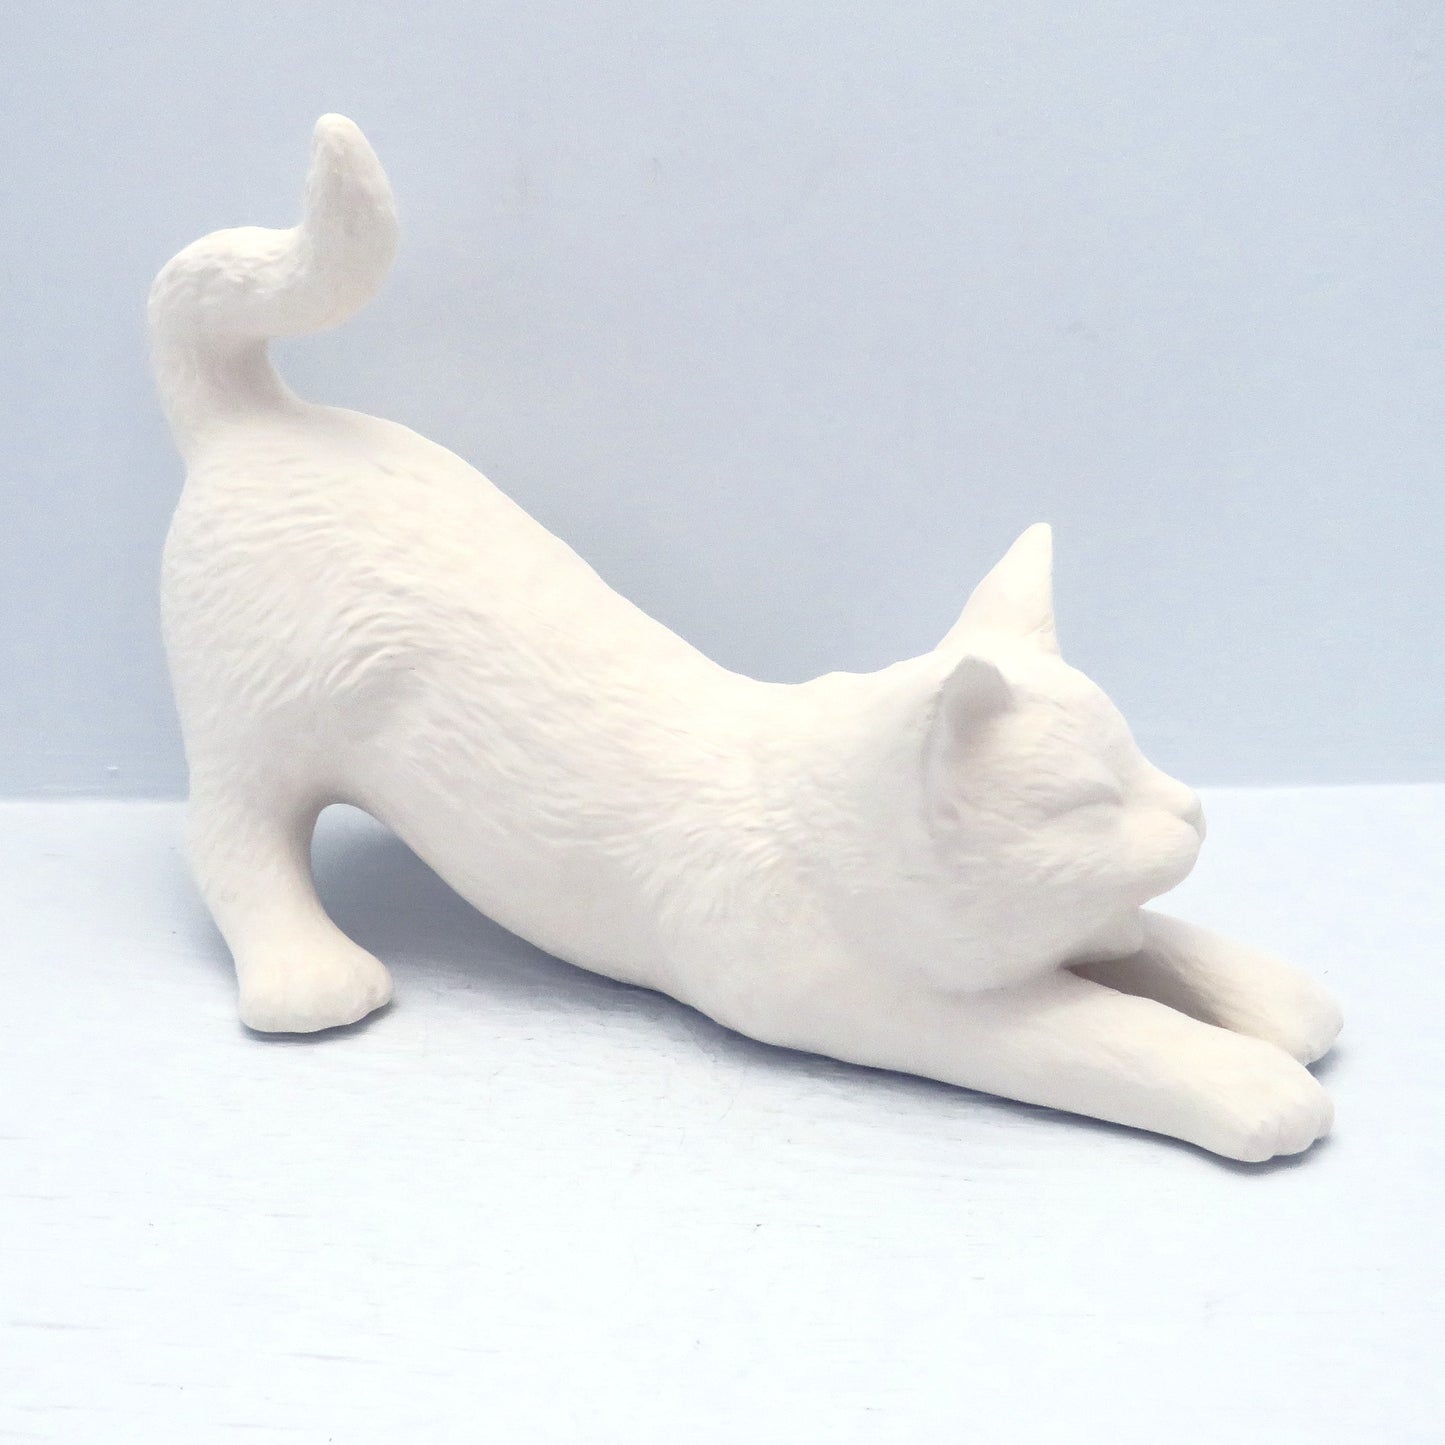 Handmade ready to paint ceramic stretching cat angled so its head is to the right.  Its tale and rear end are up.